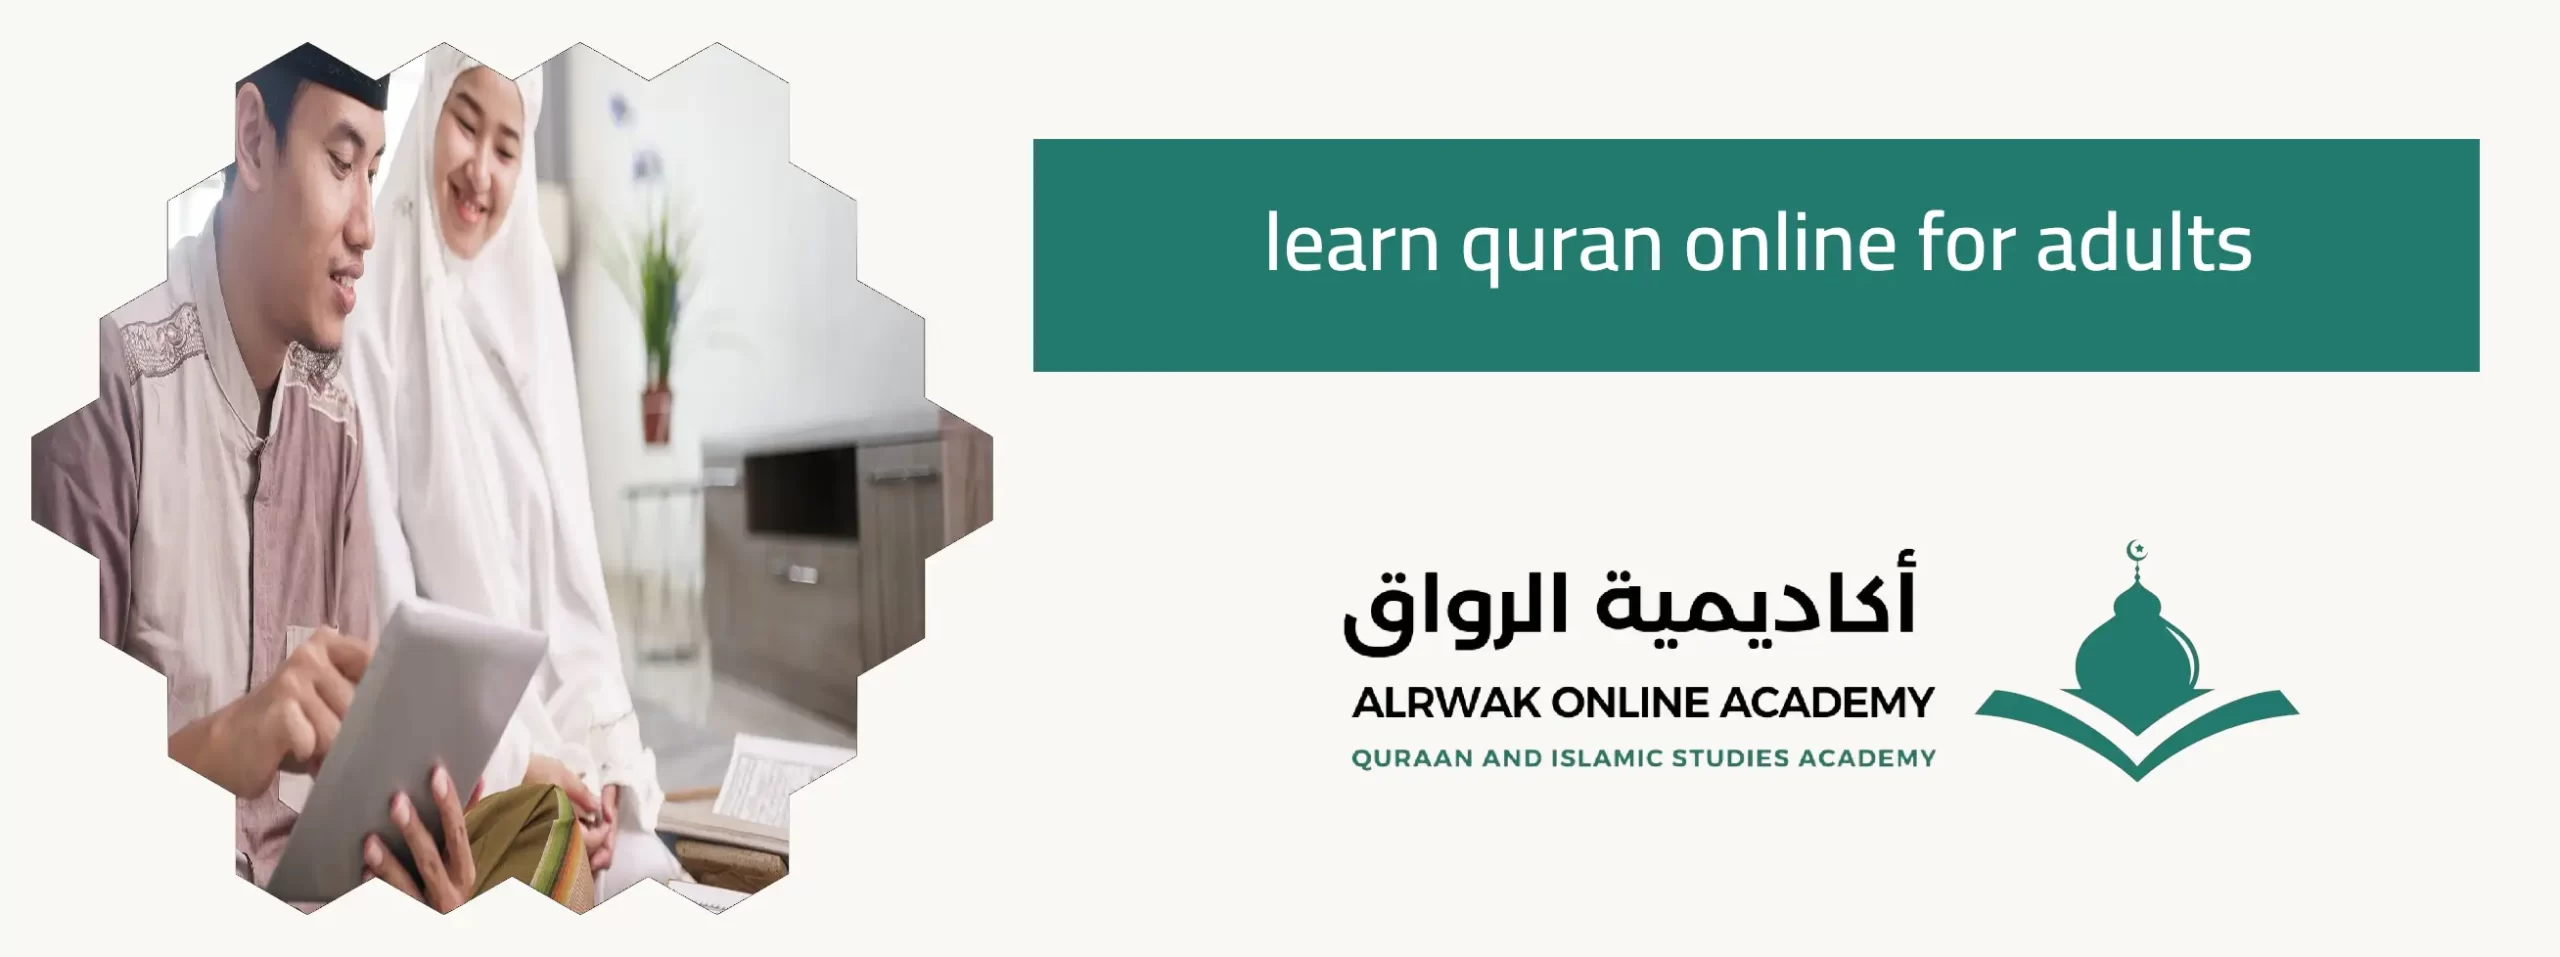 learn quran online for adults